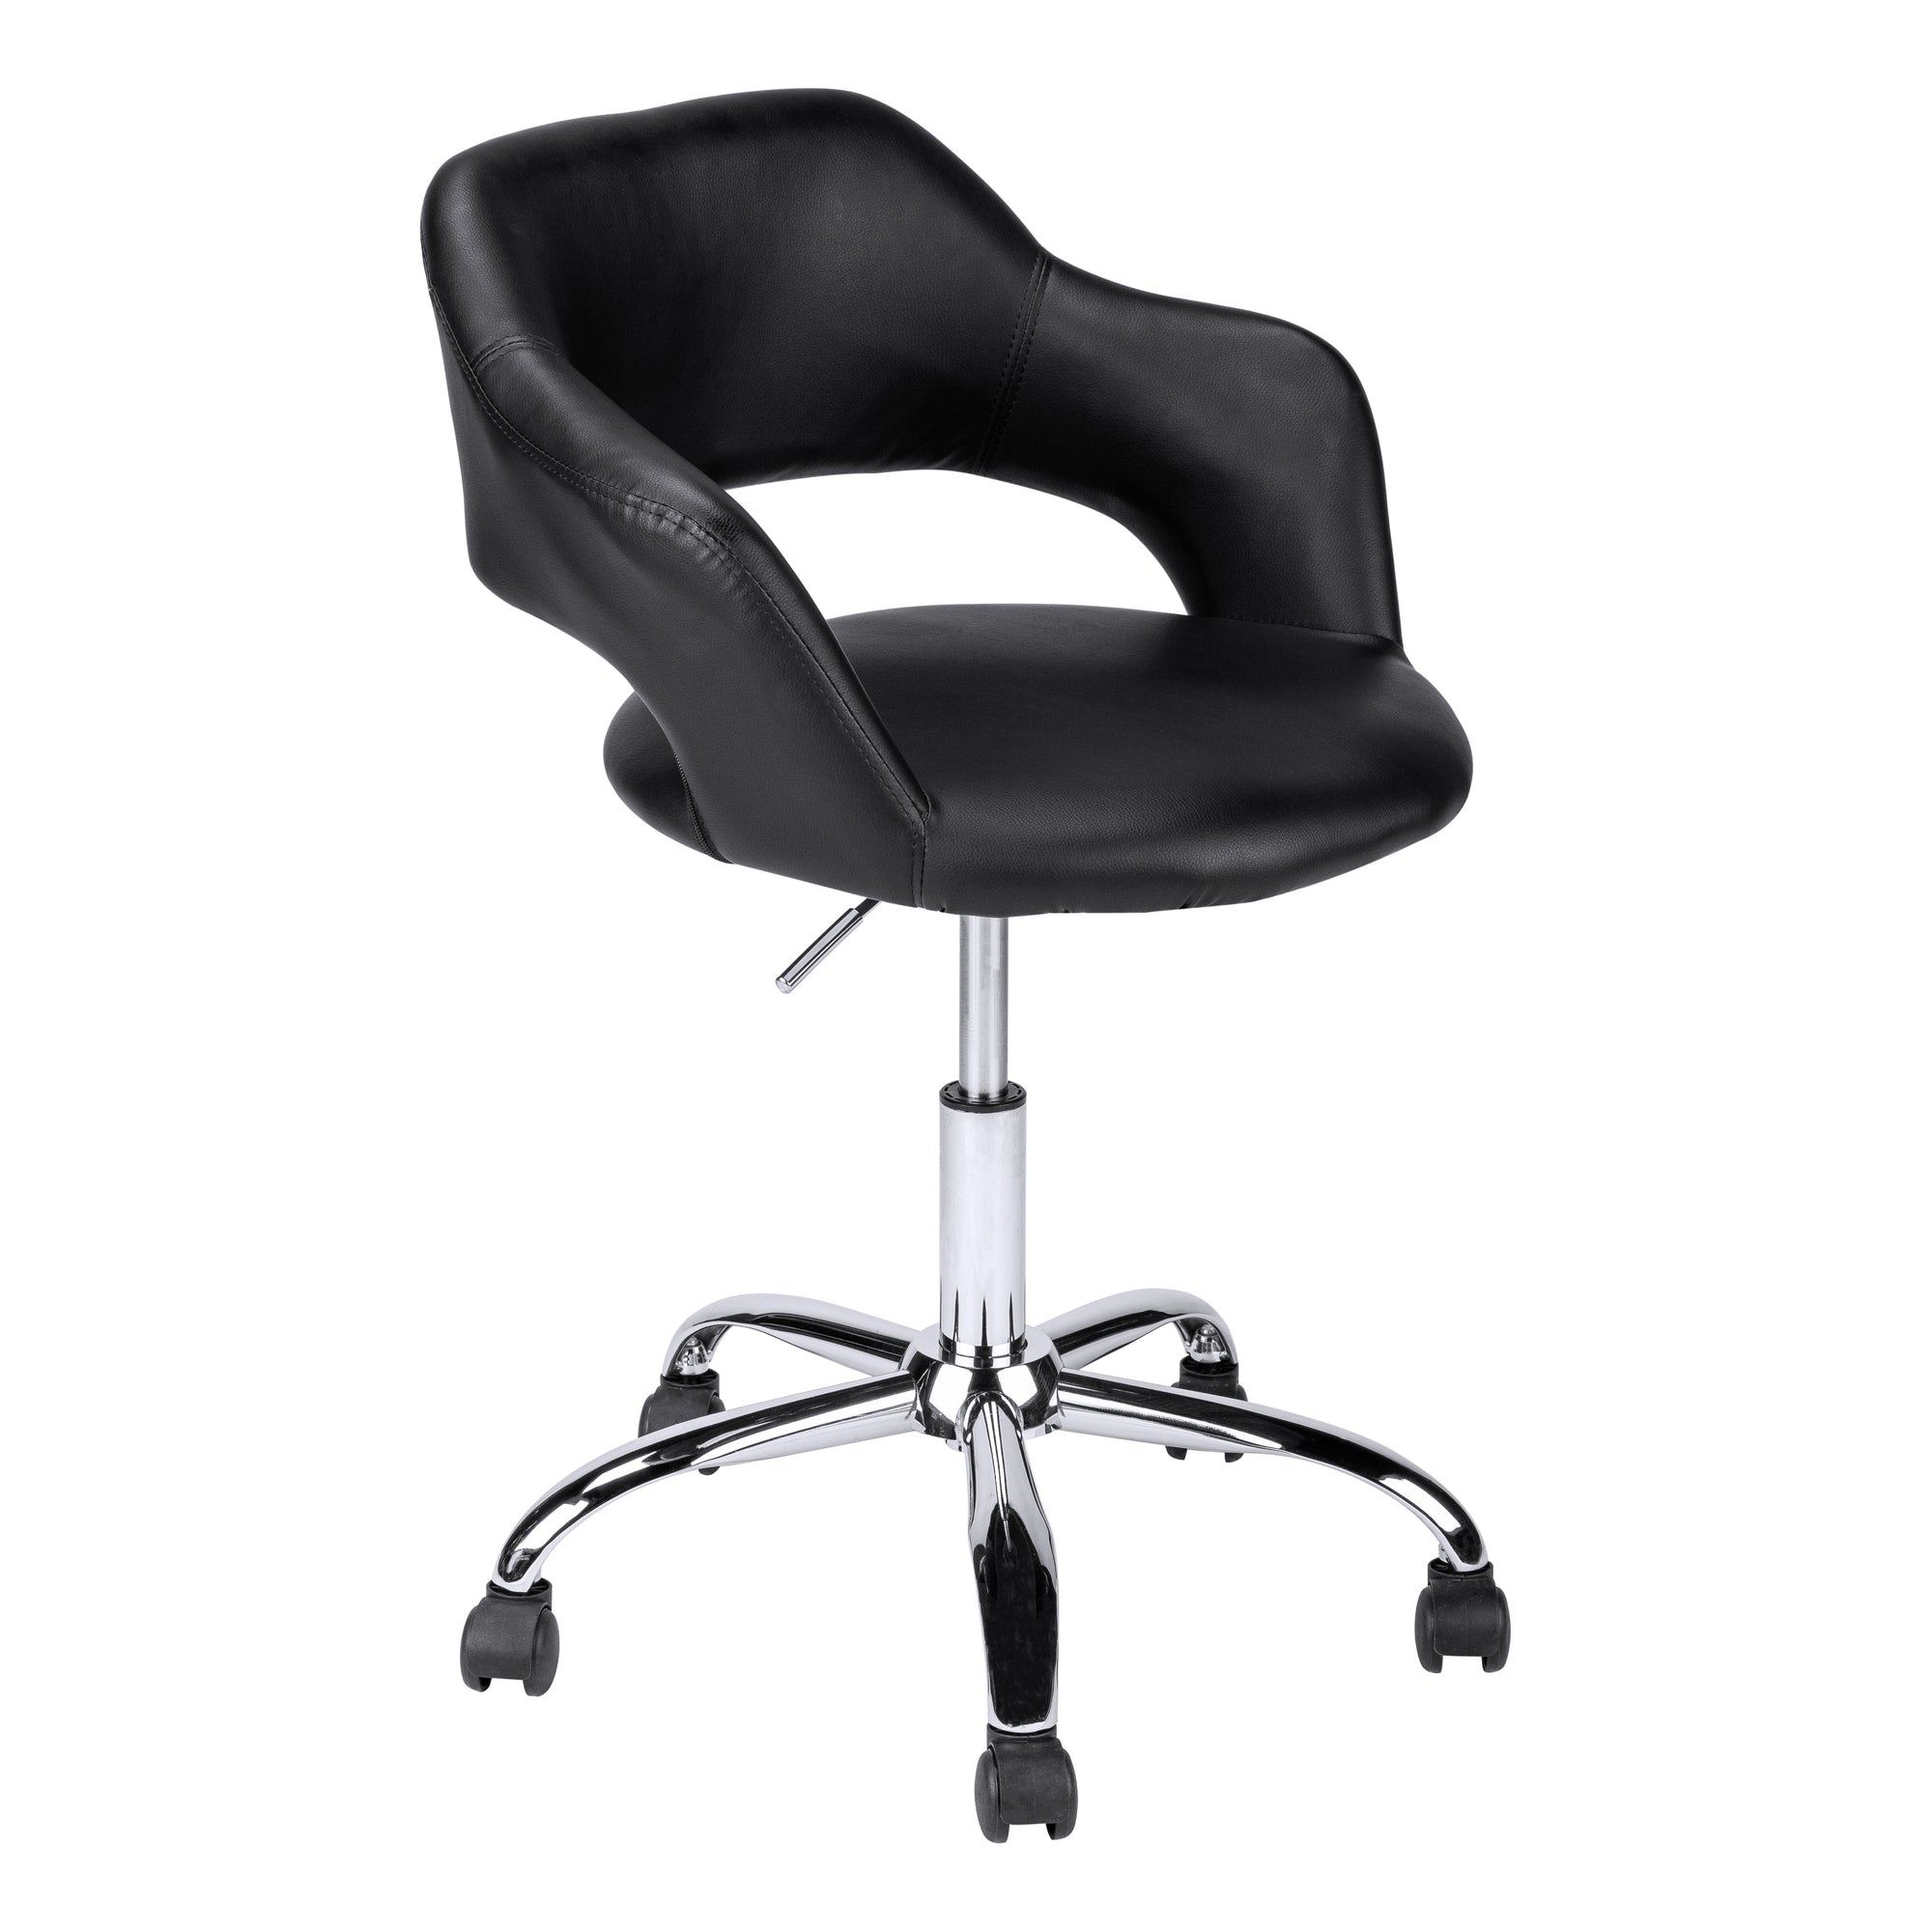 OFFICE CHAIR - WHITE / CHROME METAL HYDRAULIC LIFT BASE